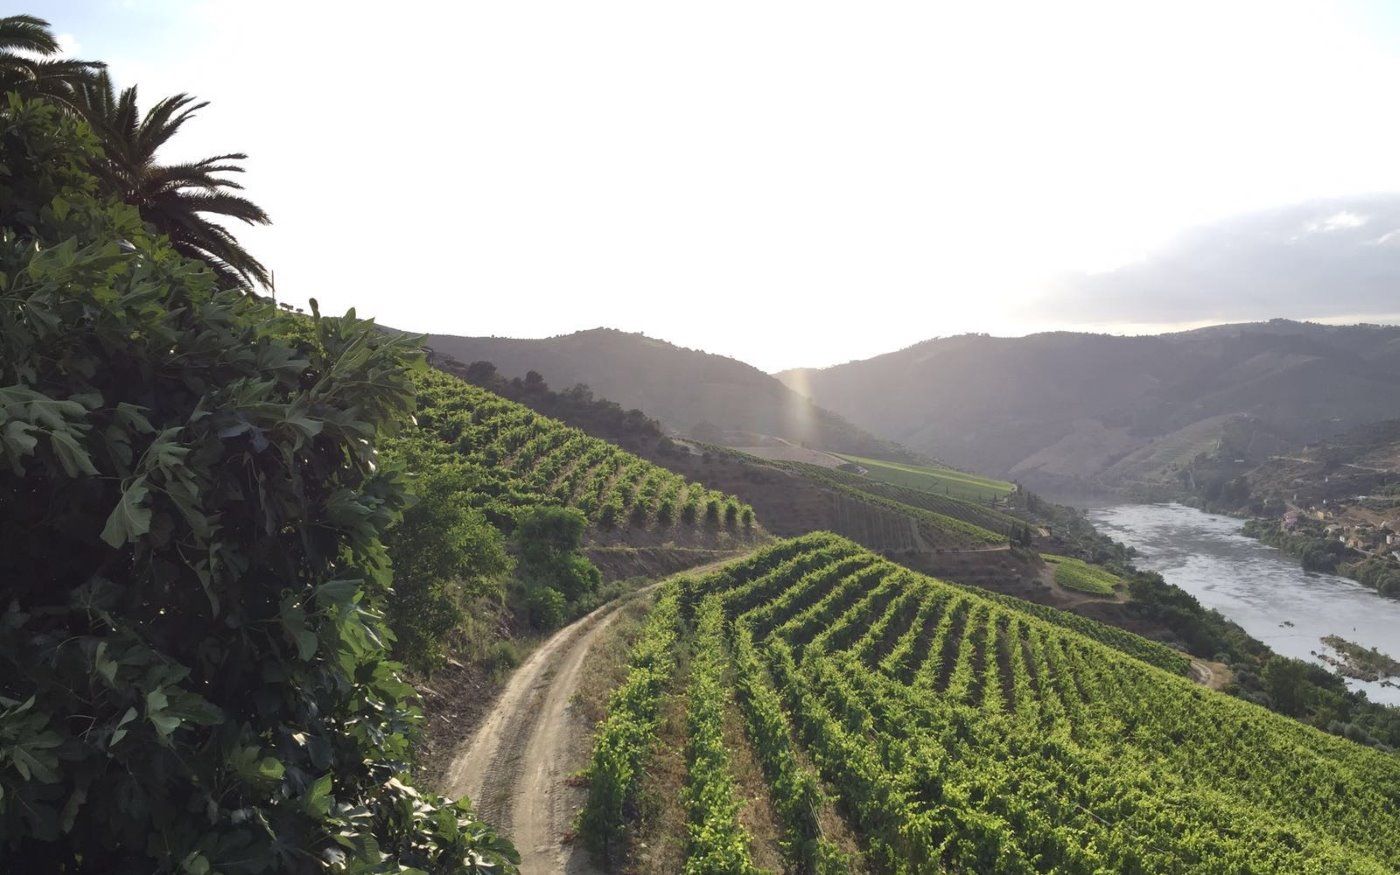 ONE DAY IN DOURO